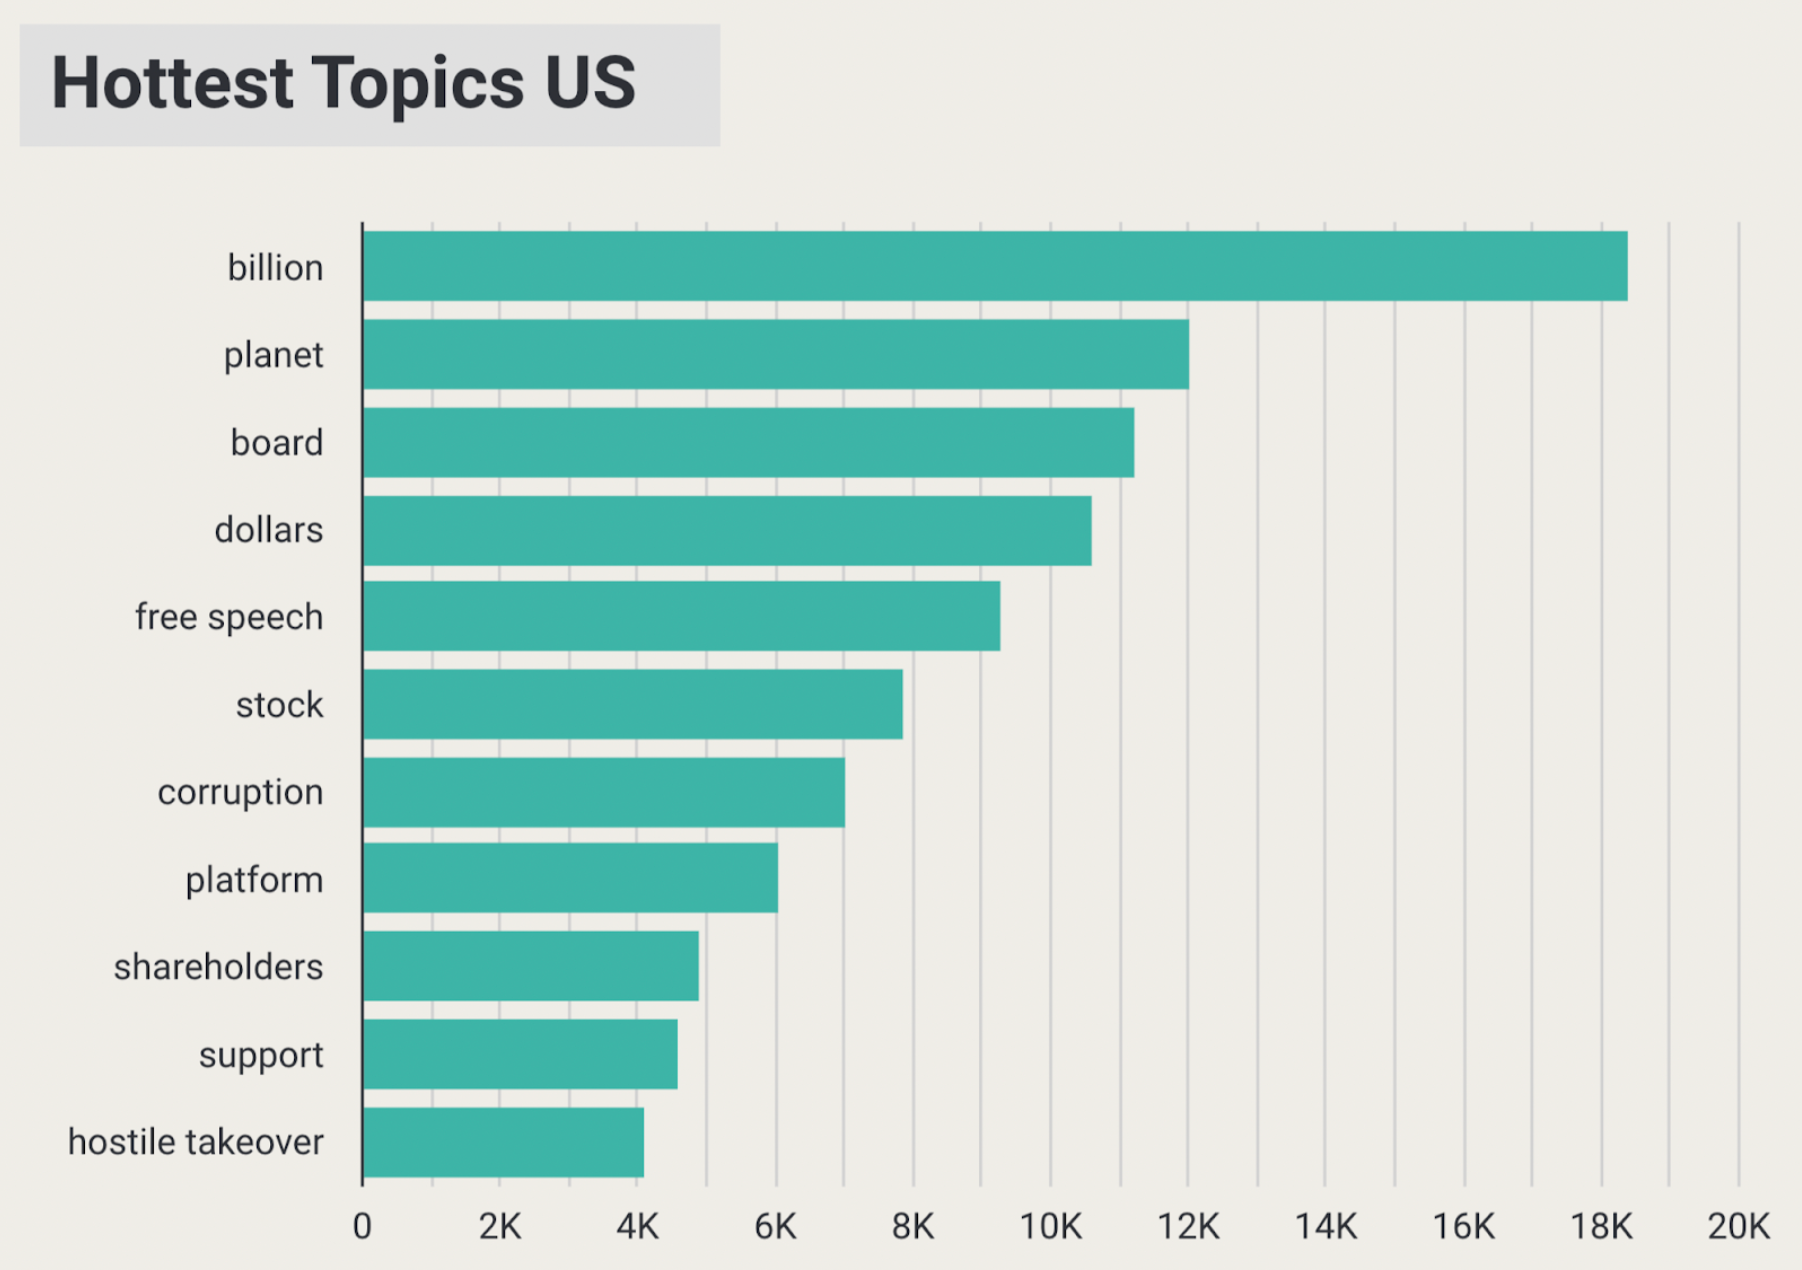 Figure 4: The aggregated occurrences of top keywords and topics in the US.